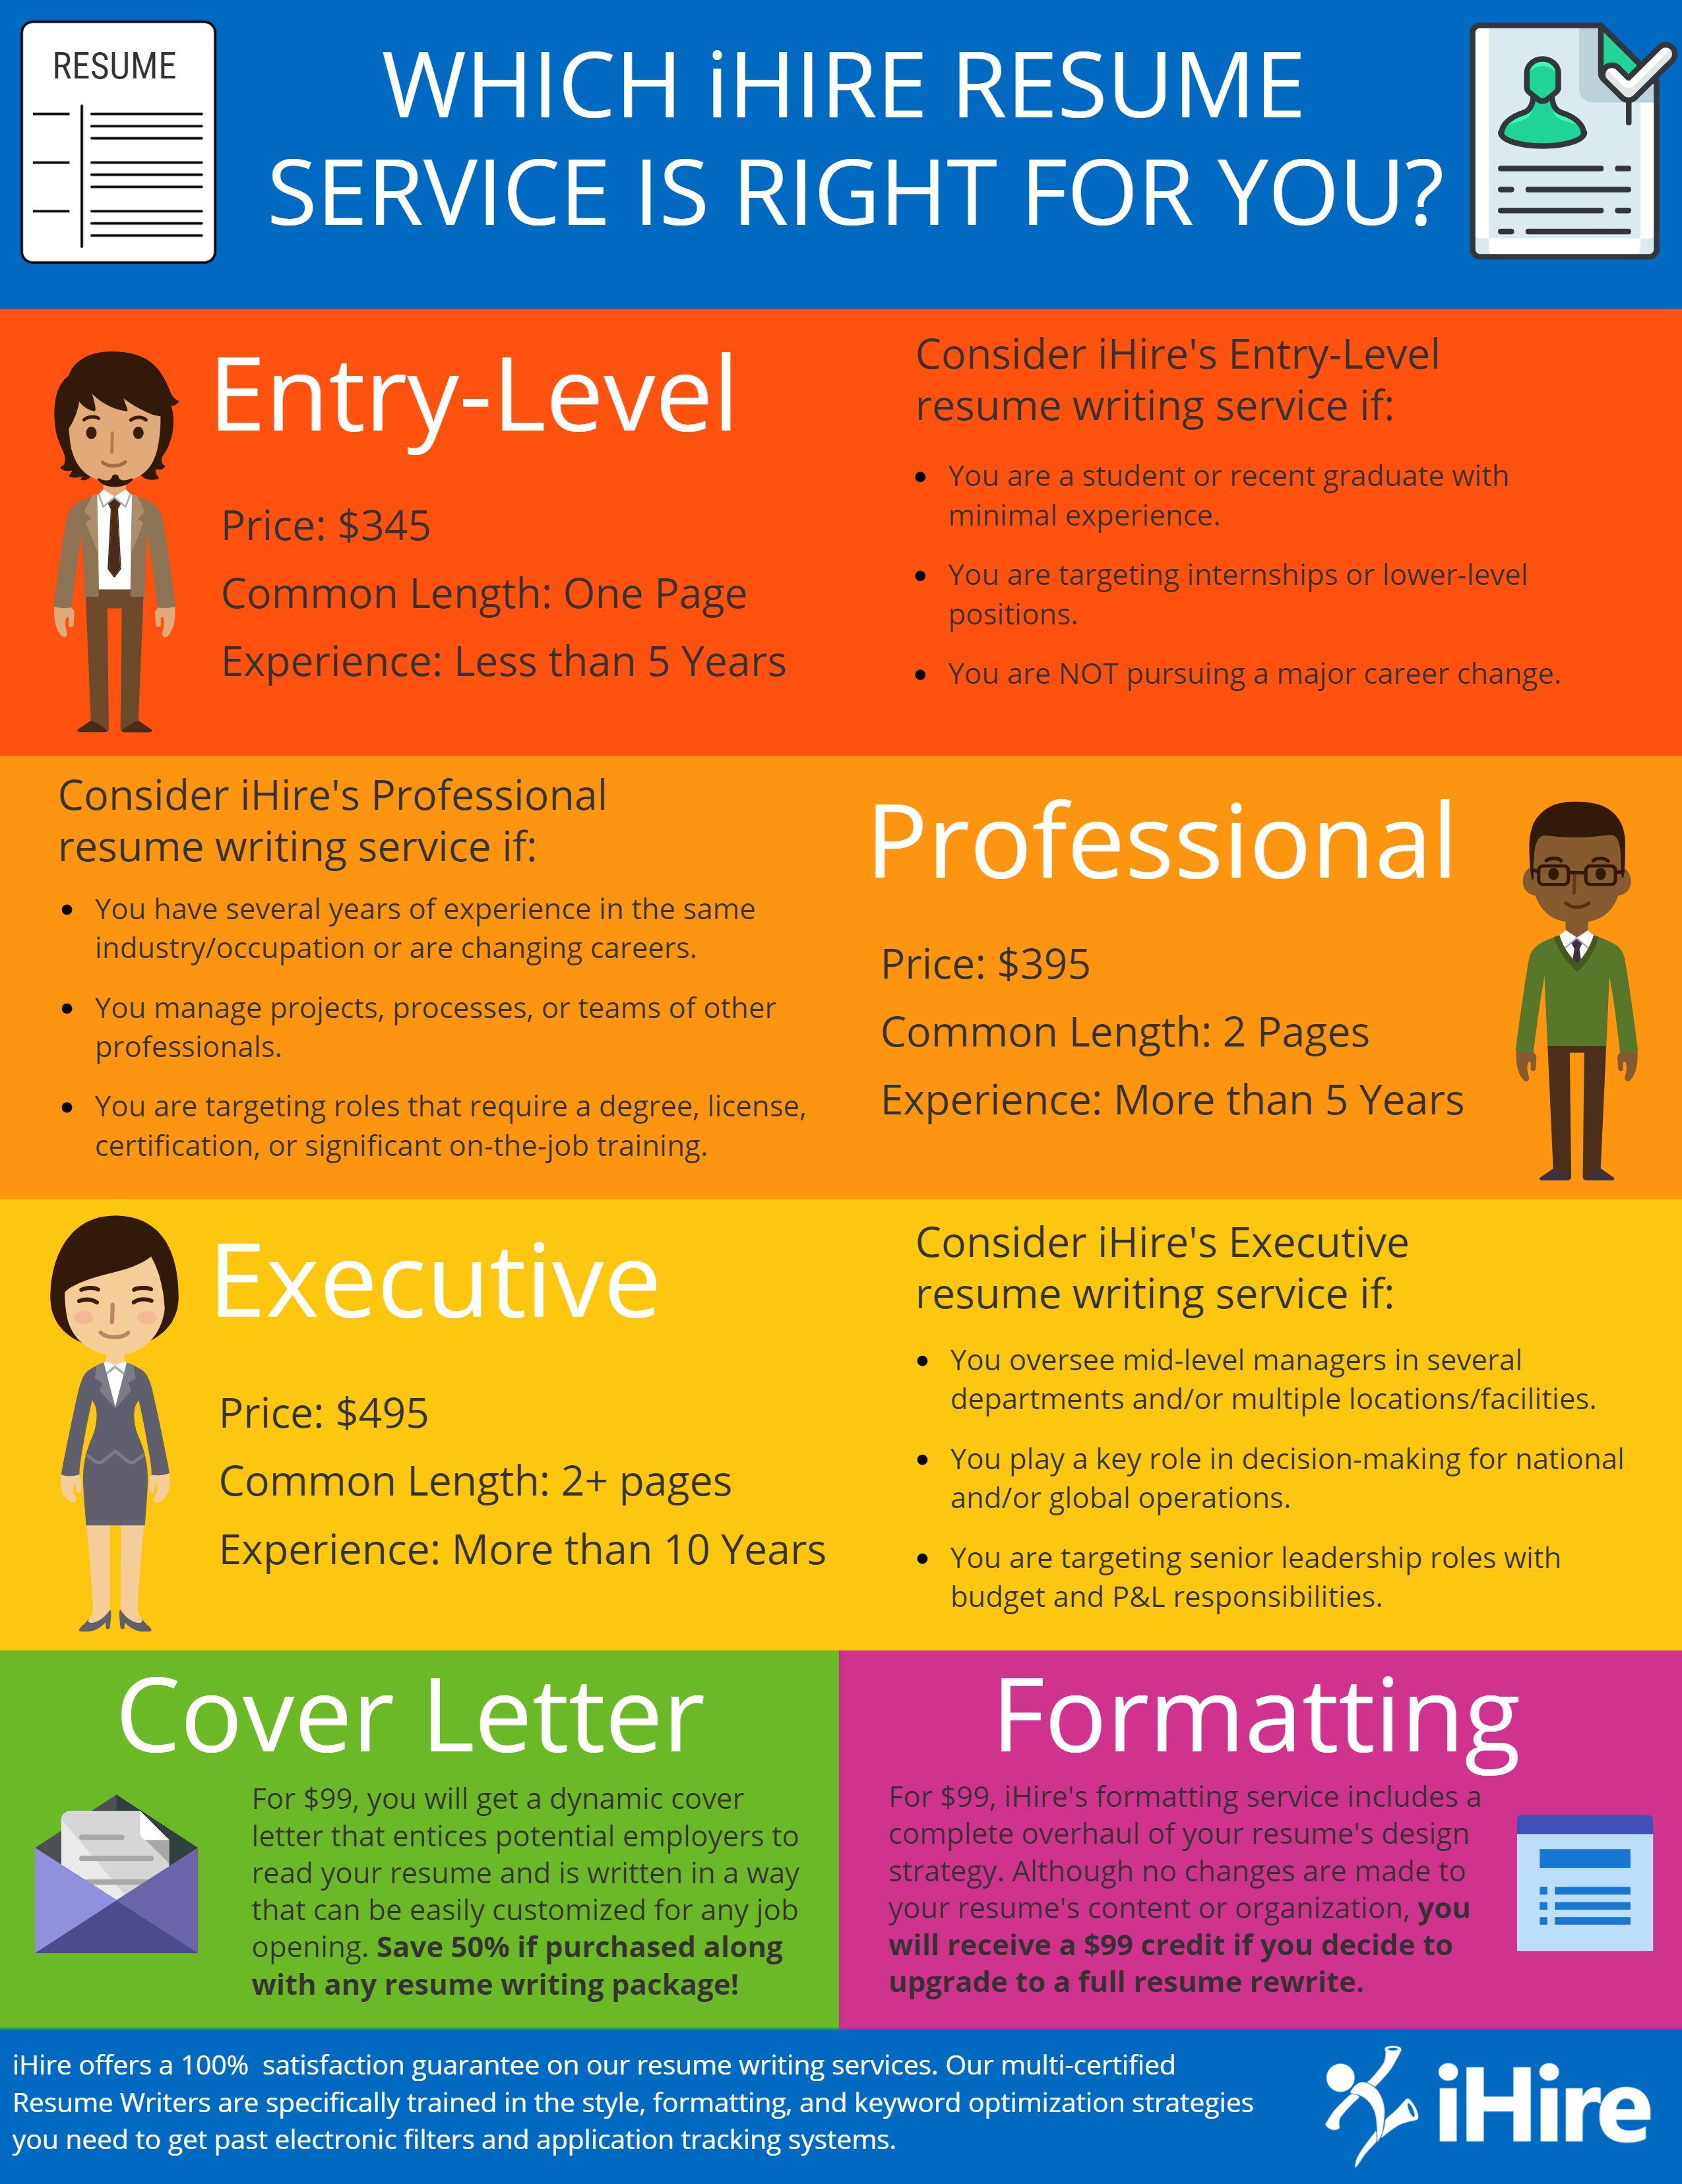 What are the best resume writing services